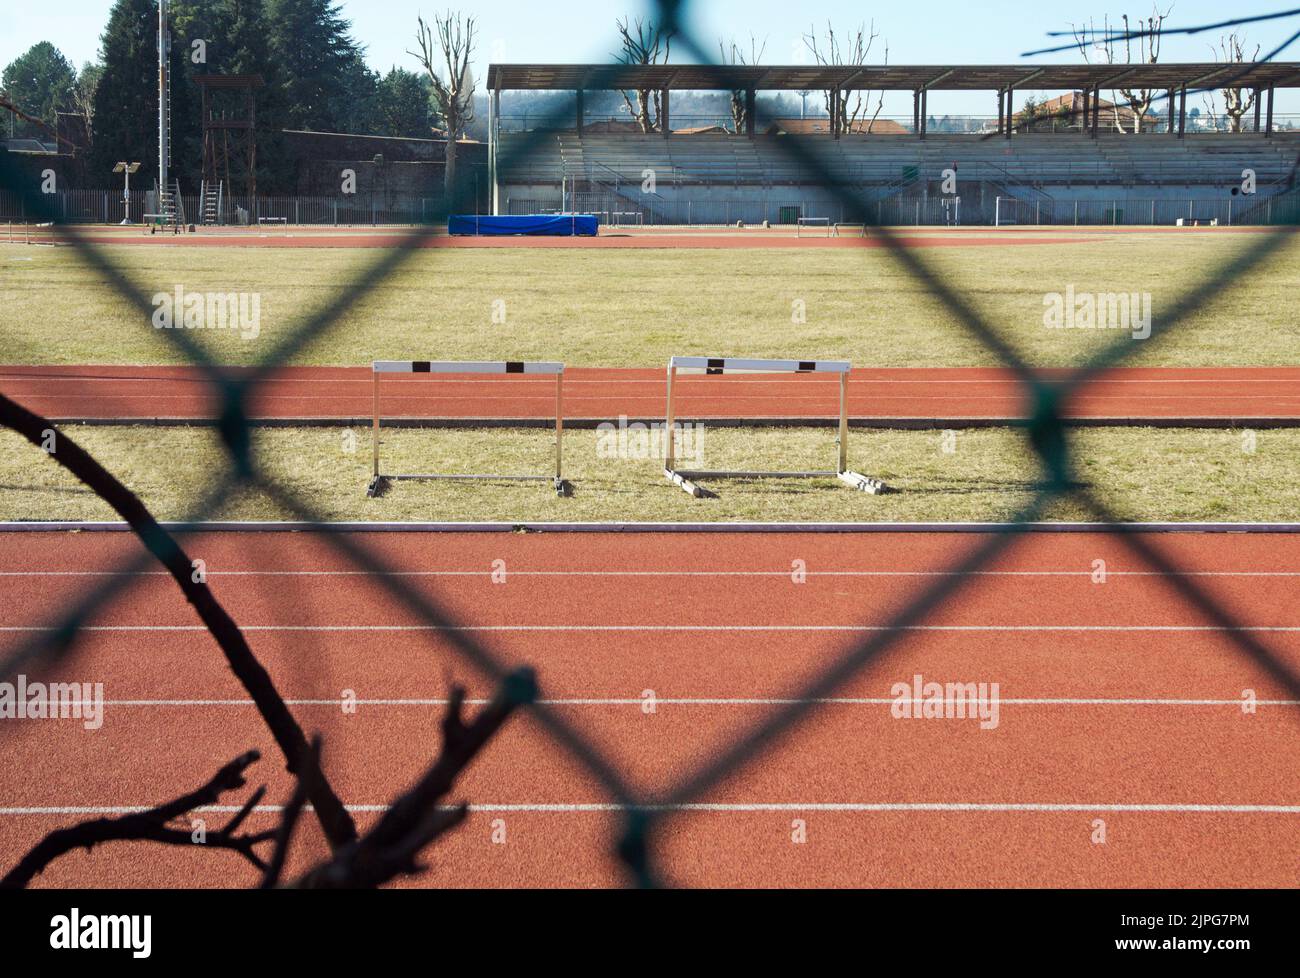 athletic field seen through a fencing net Stock Photo